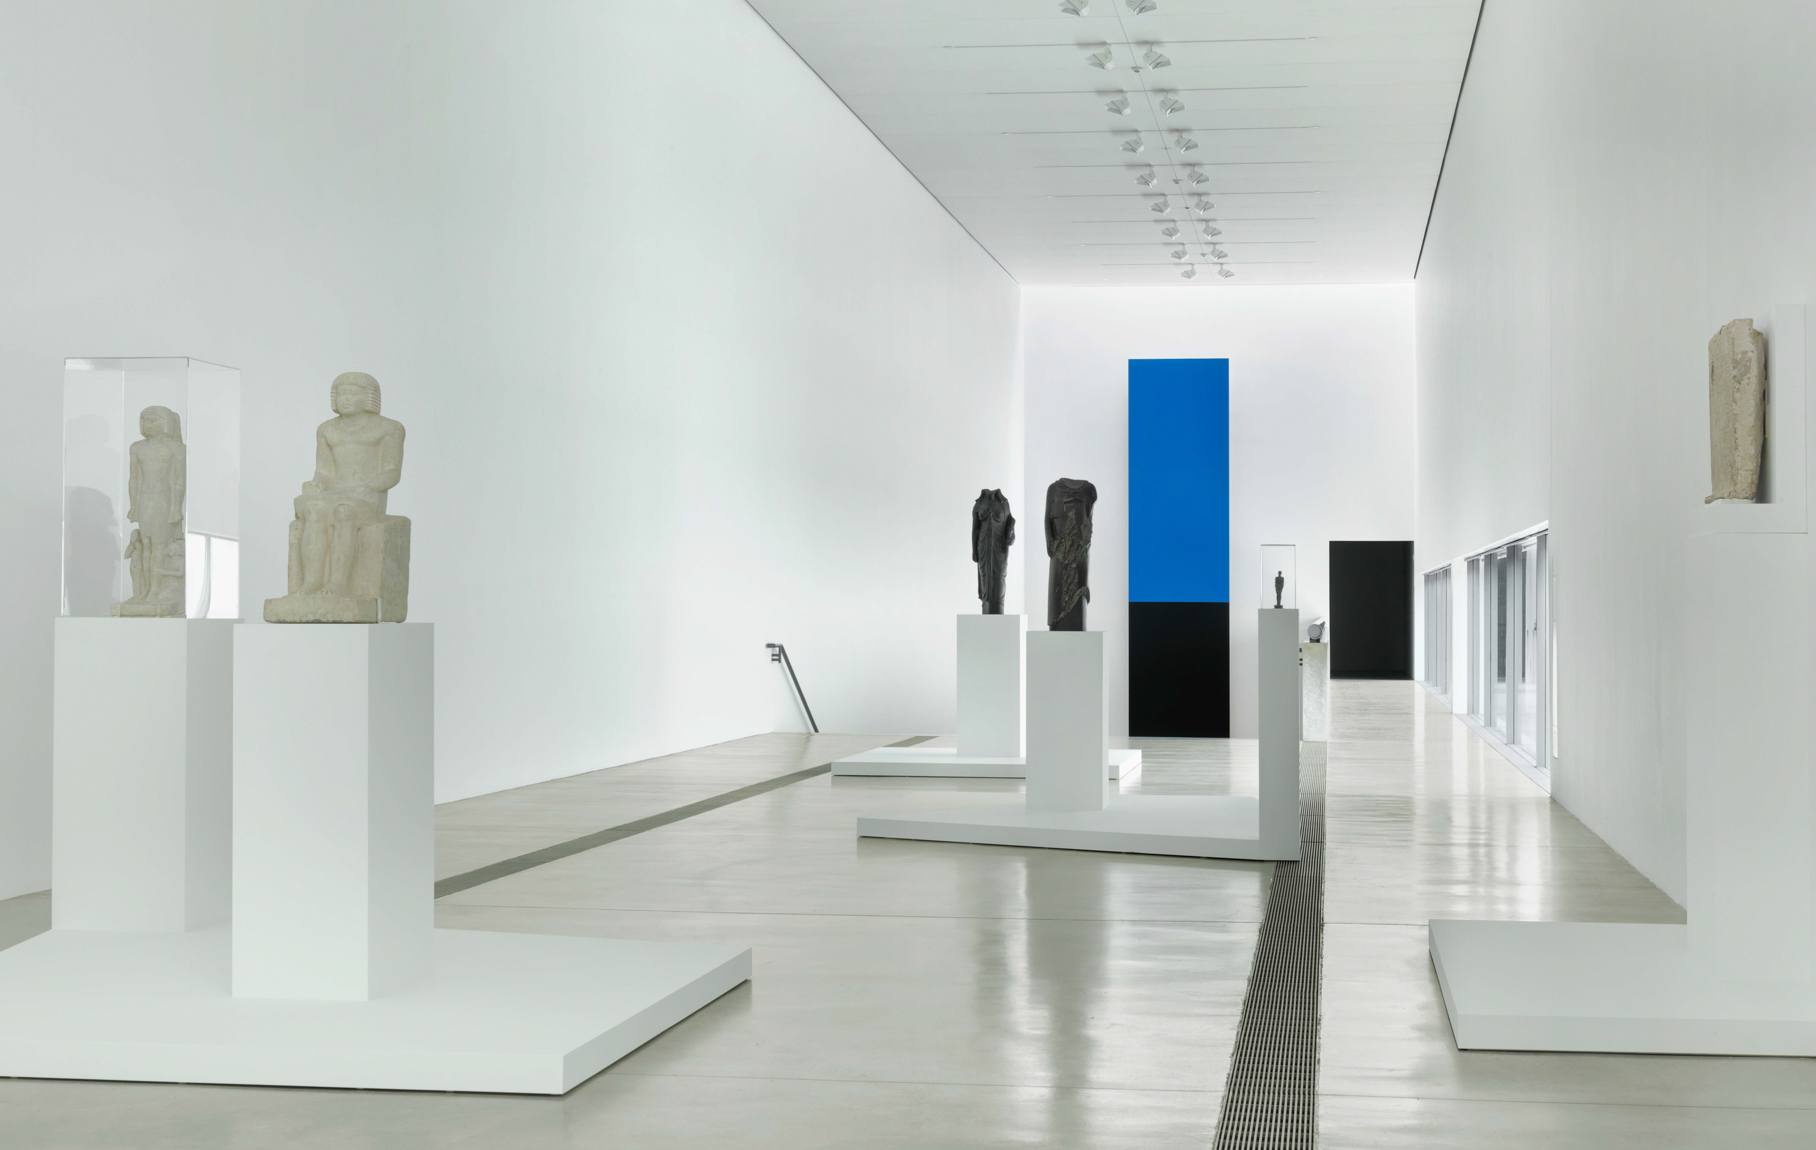 A view of Egyptian sculptures on podiums and vitrines in the Main Gallery.